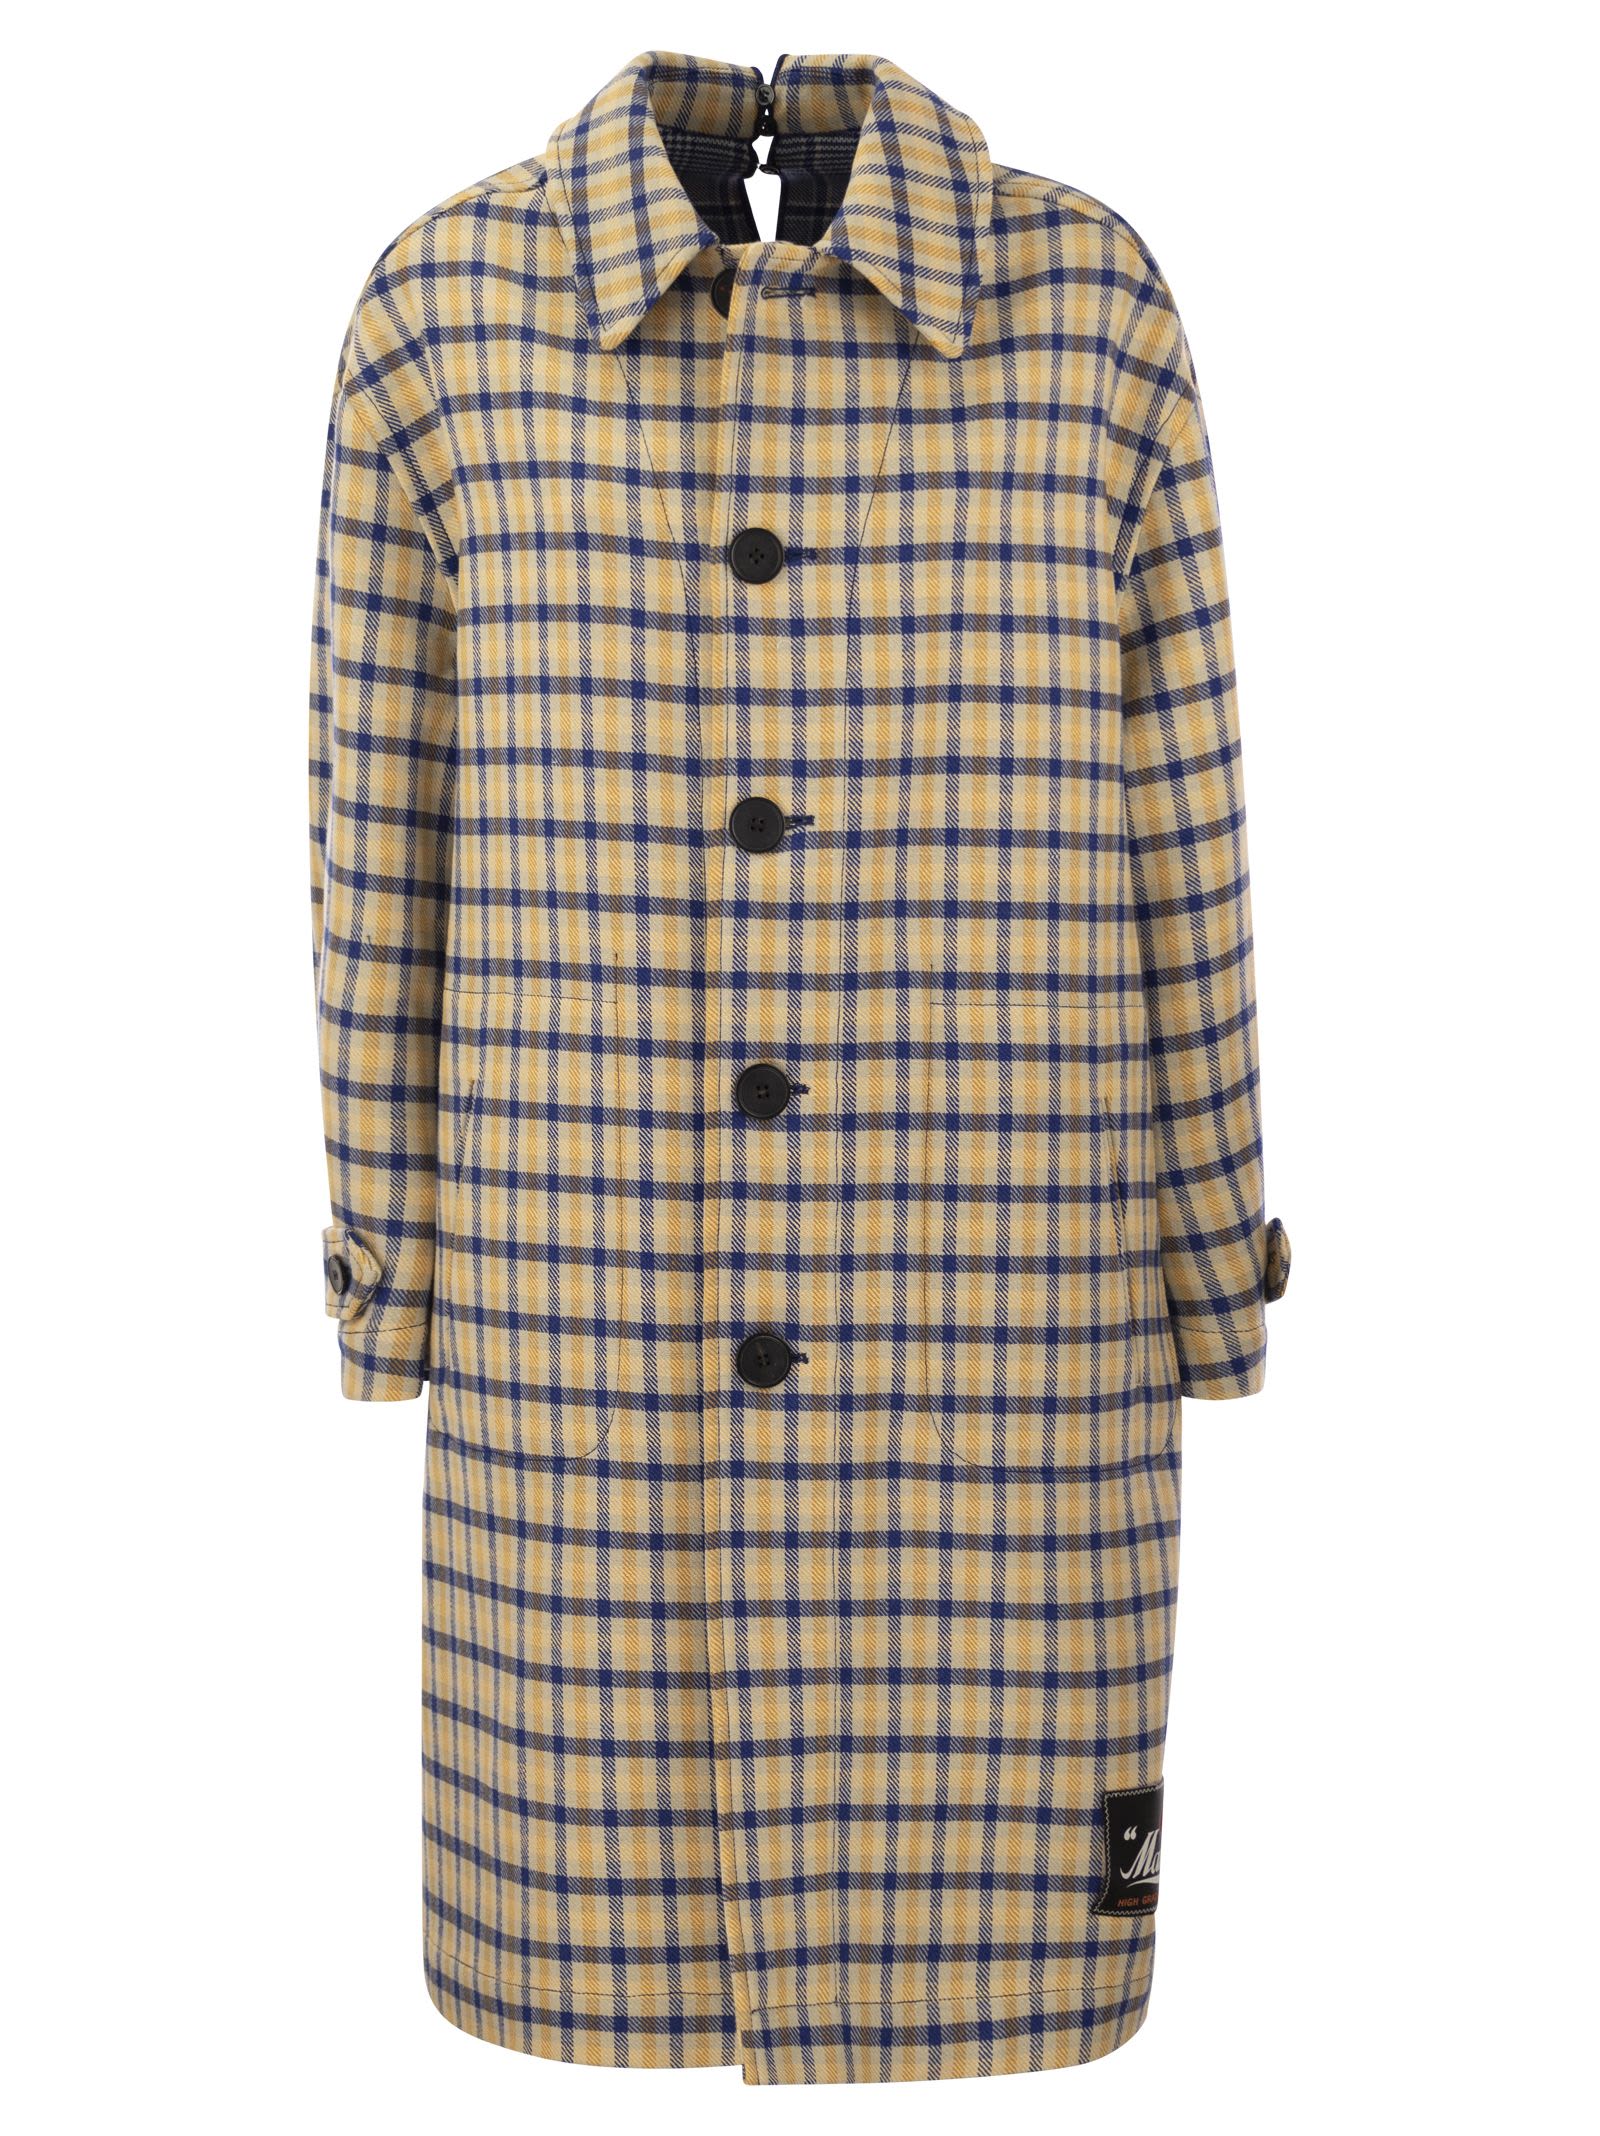 MARNI REVERSIBLE WOOL COAT WITH CHECK PATTERN